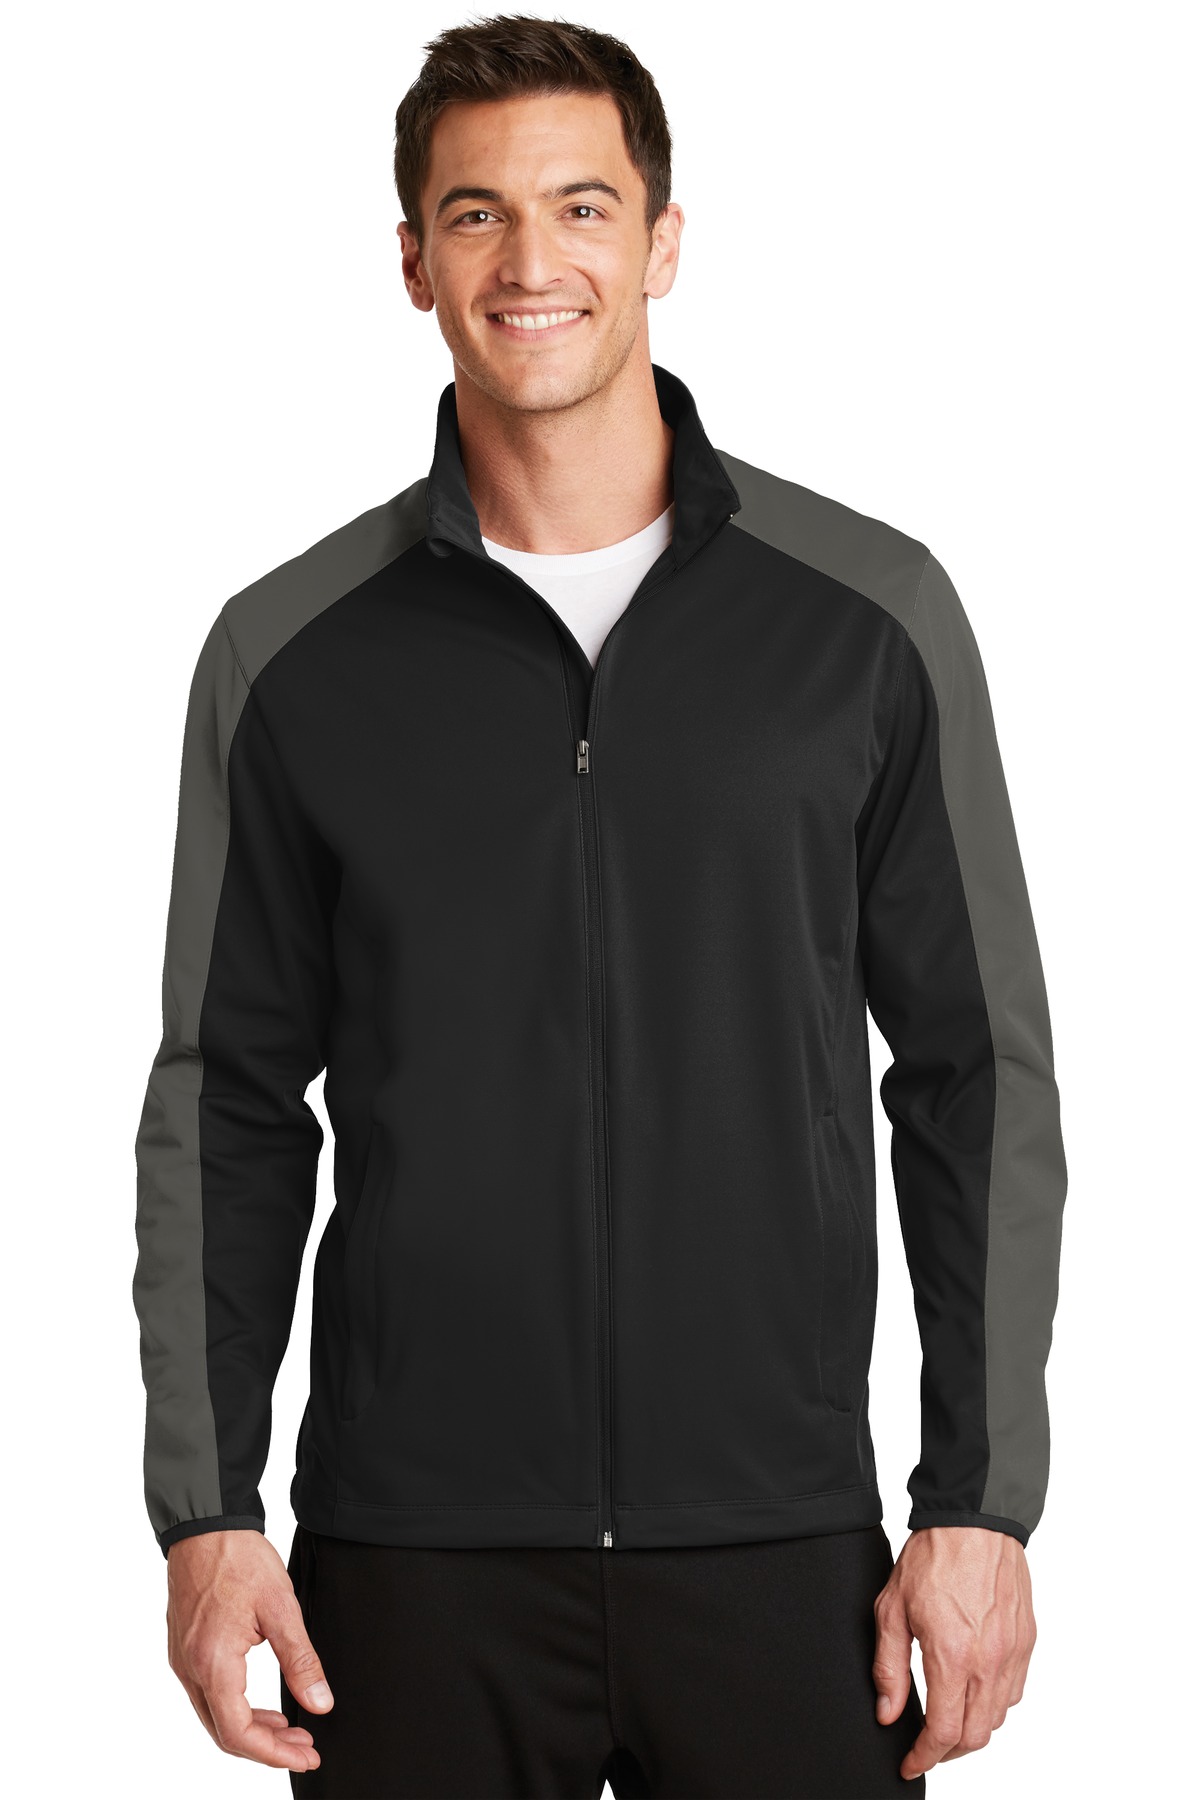 Port Authority Outerwear for Corporate & Hospitality ® Active Colorblock Soft Shell Jacket.-Port Authority